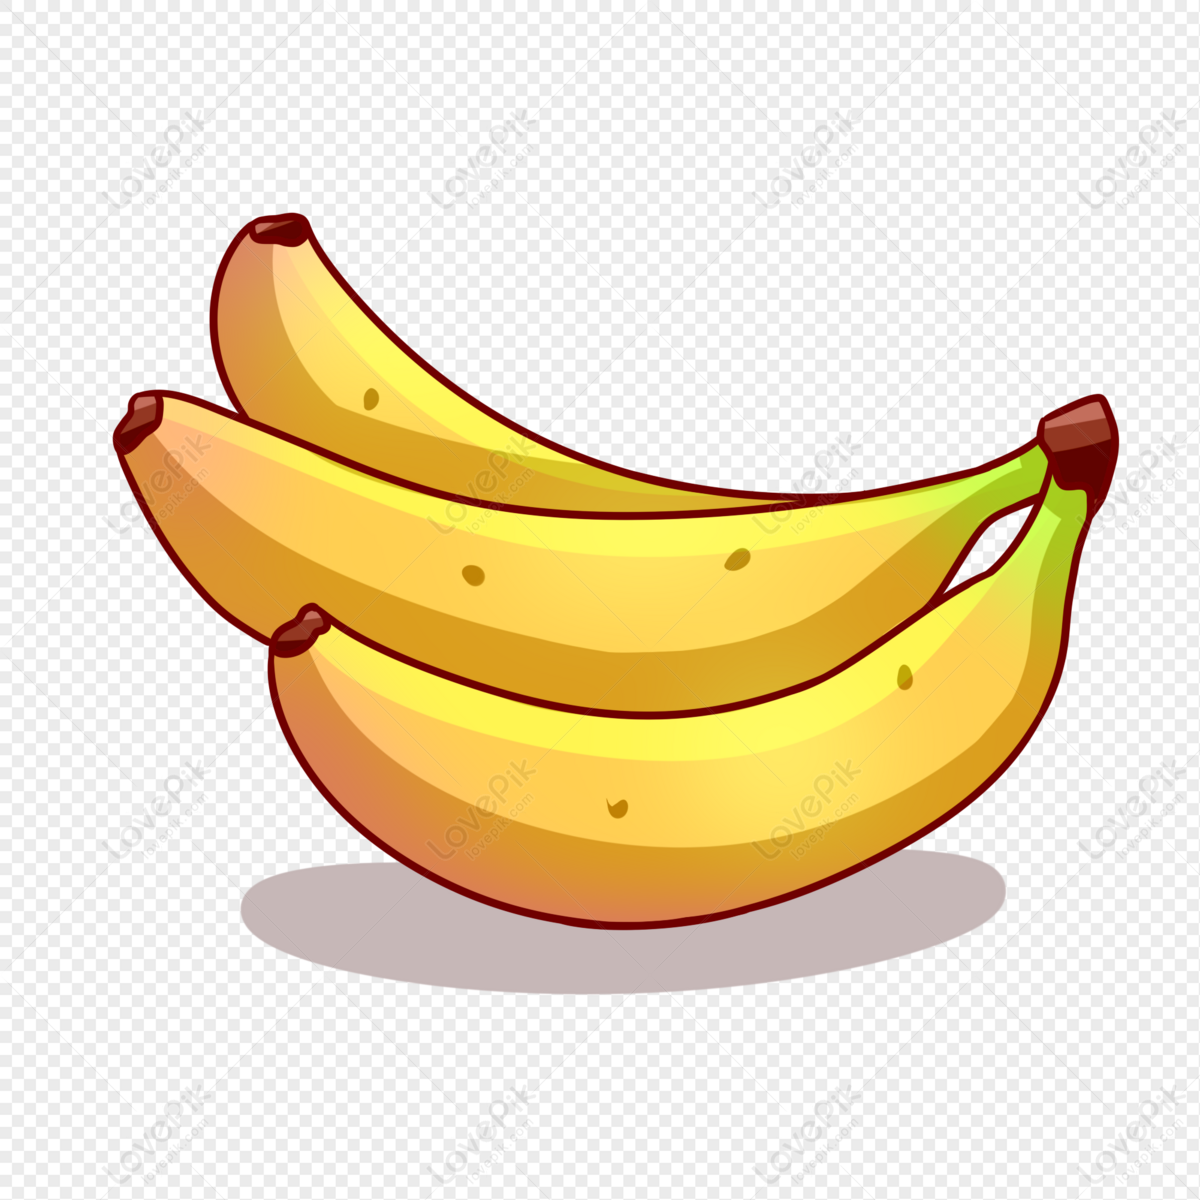 Cartoon Banana PNG White Transparent And Clipart Image For Free Download -  Lovepik | 401485802